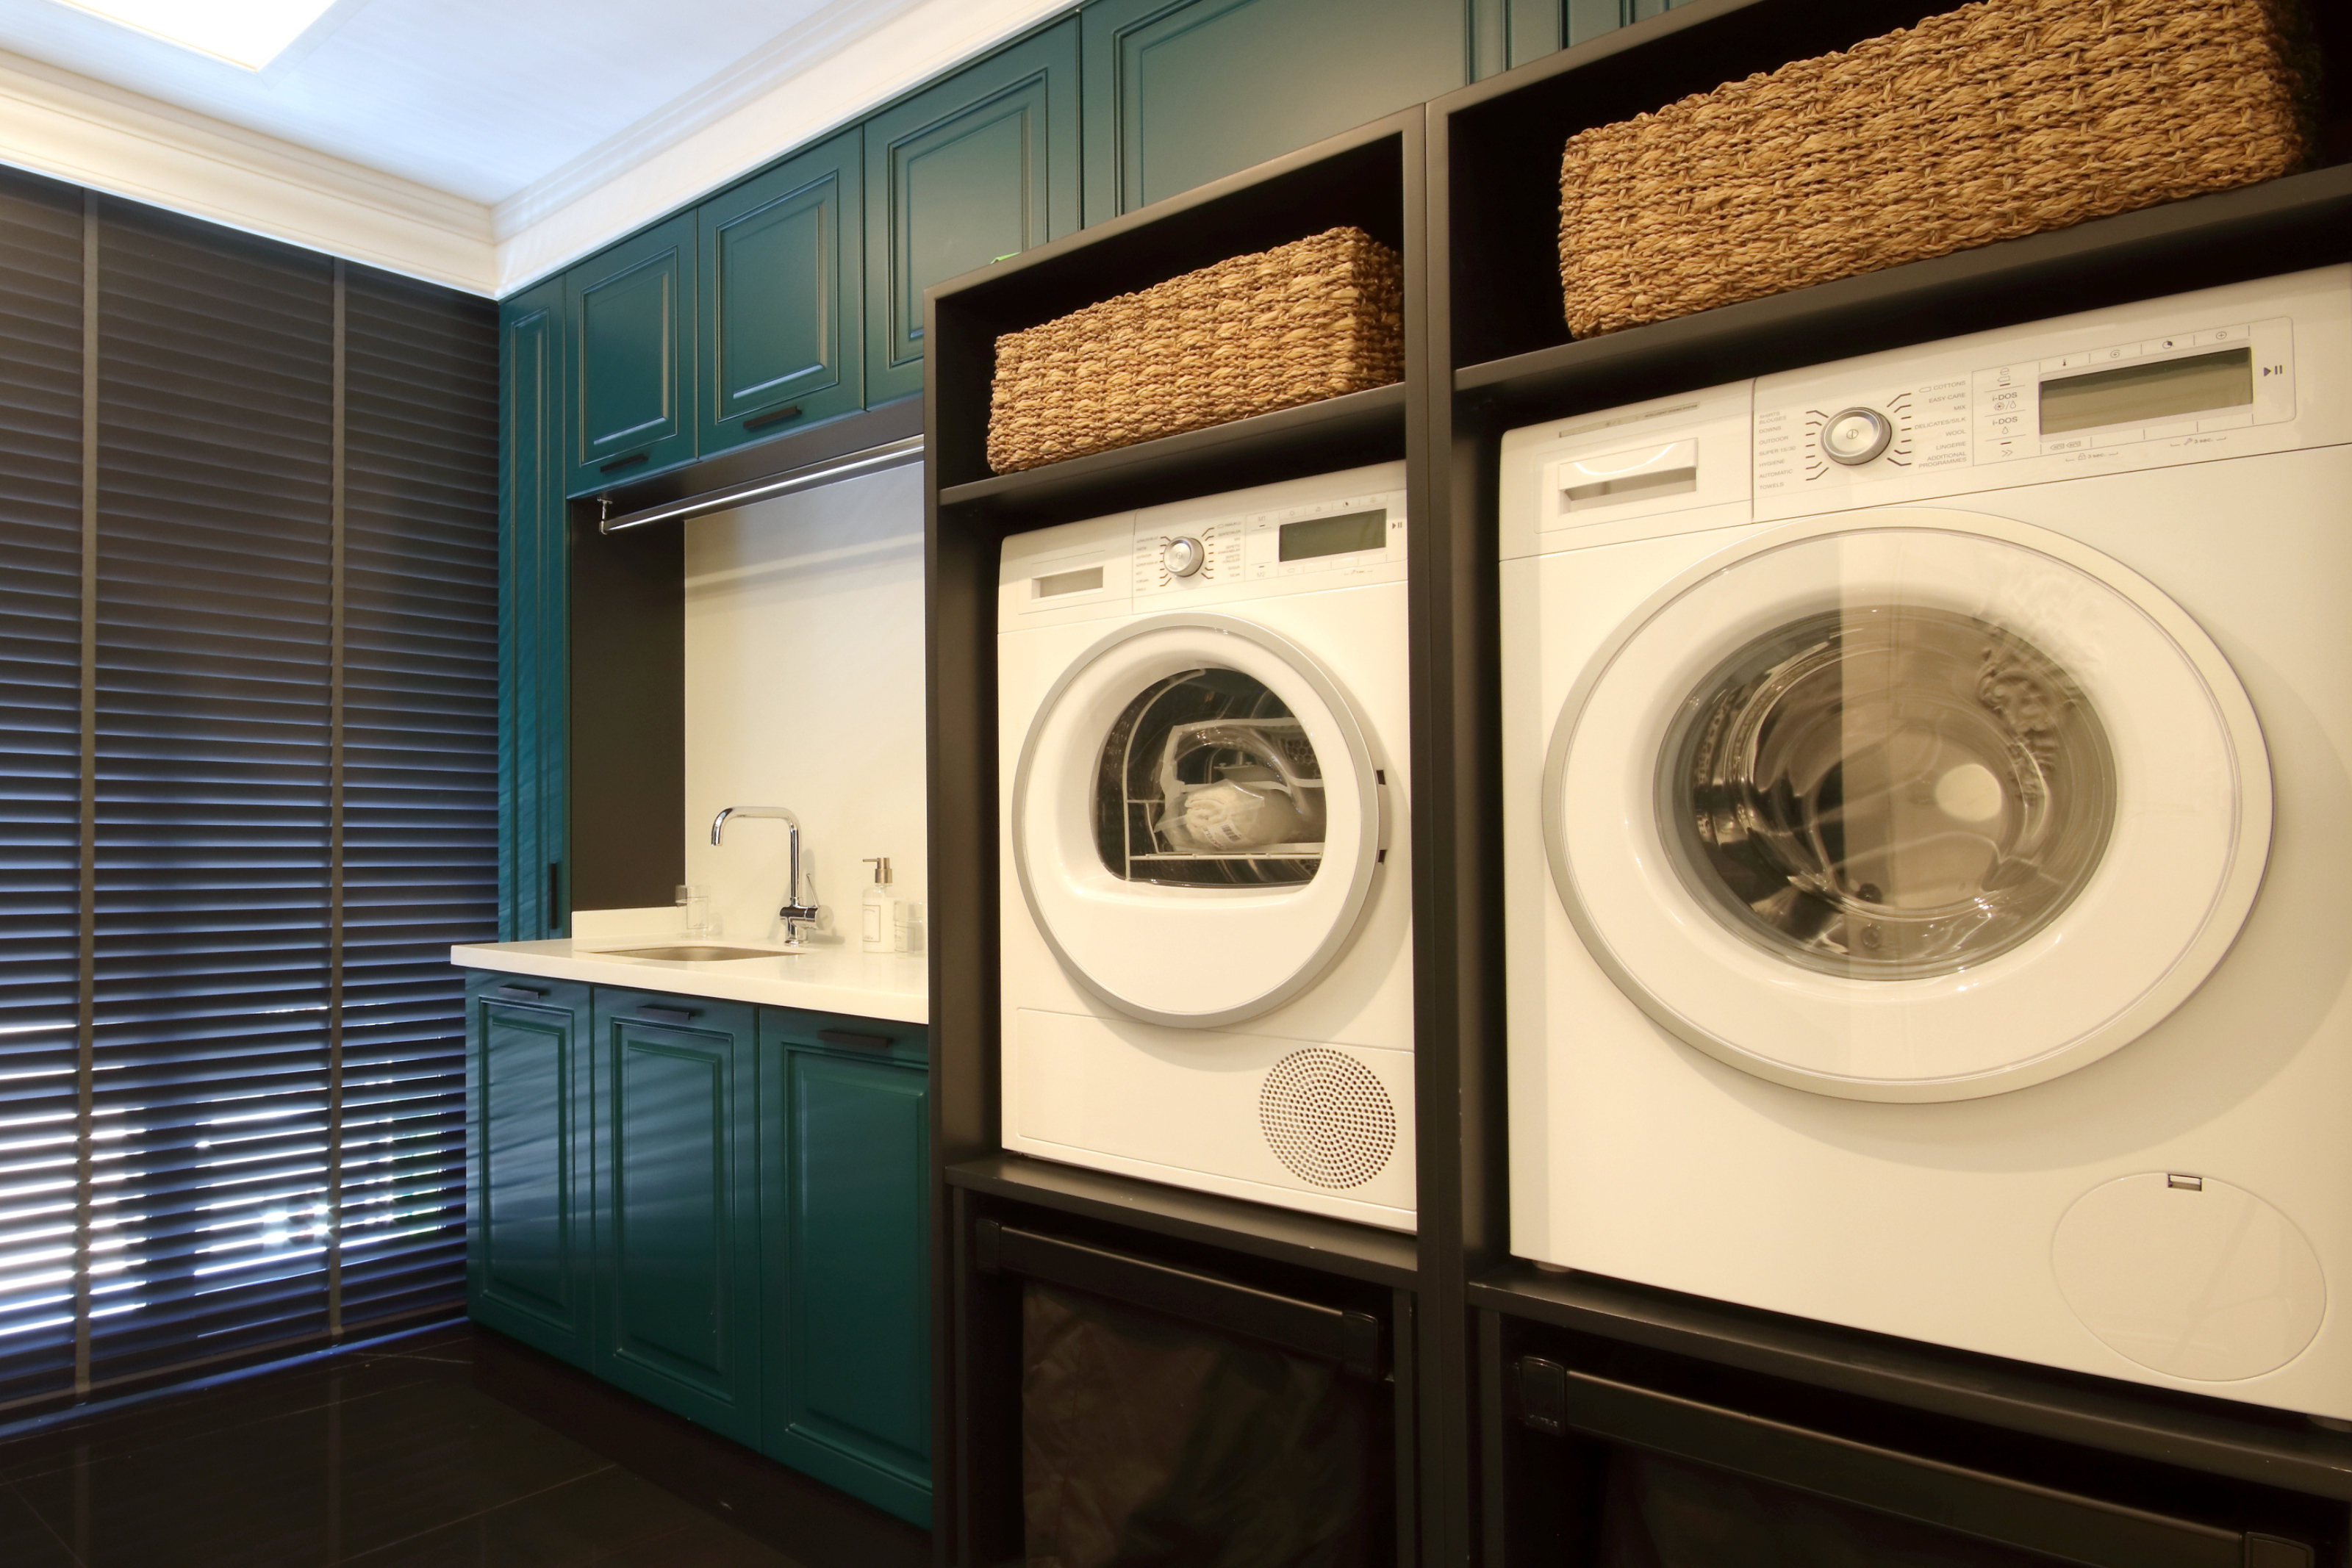 Smart Laundry Room Ideas That Make Organizing Easier & More Efficient